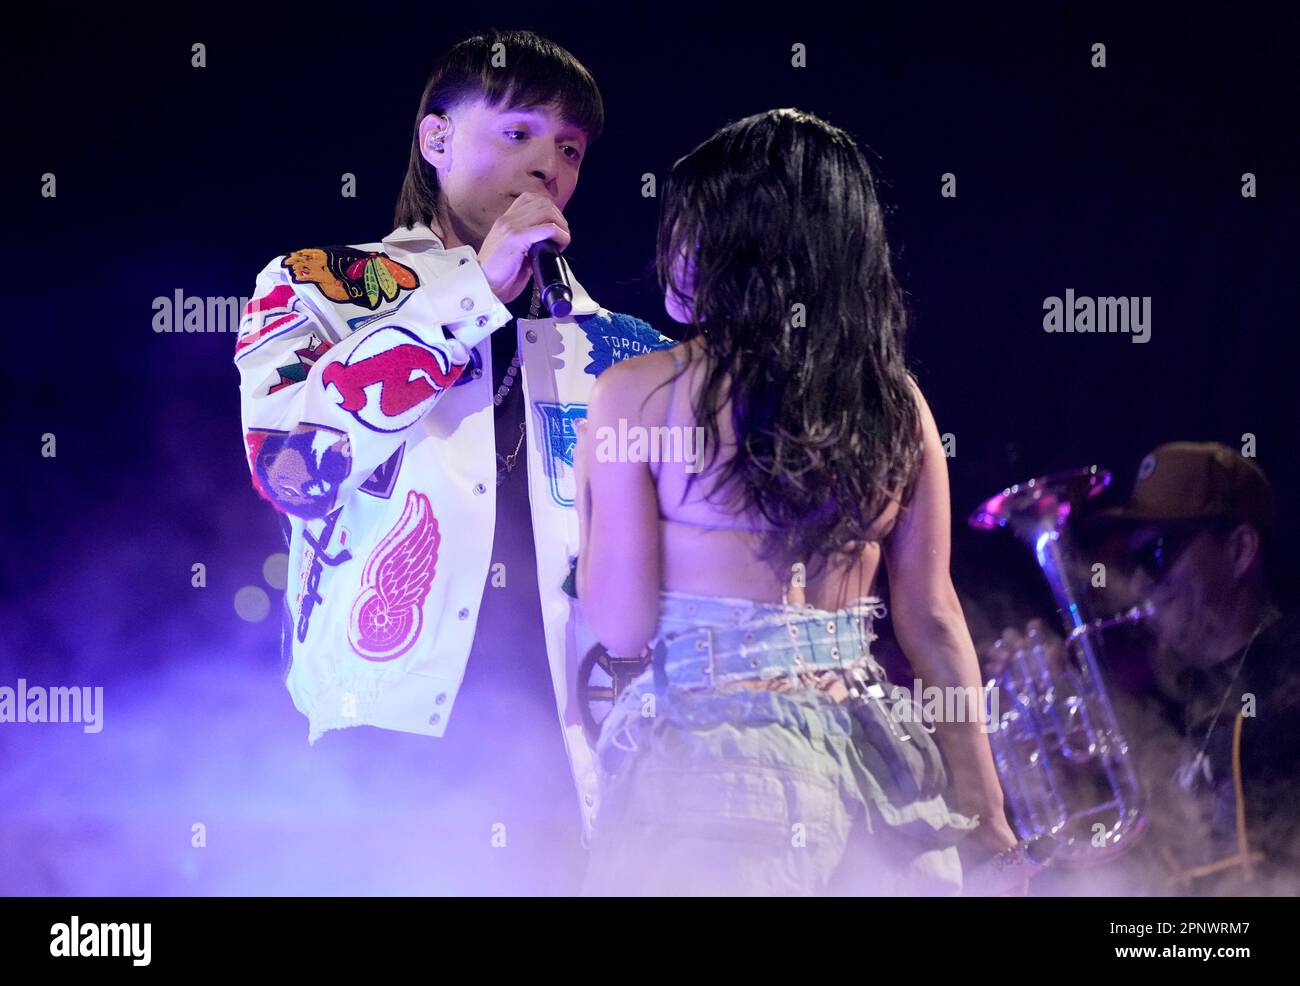 Peso Pluma, left, and Becky G perform at the Latin American Music